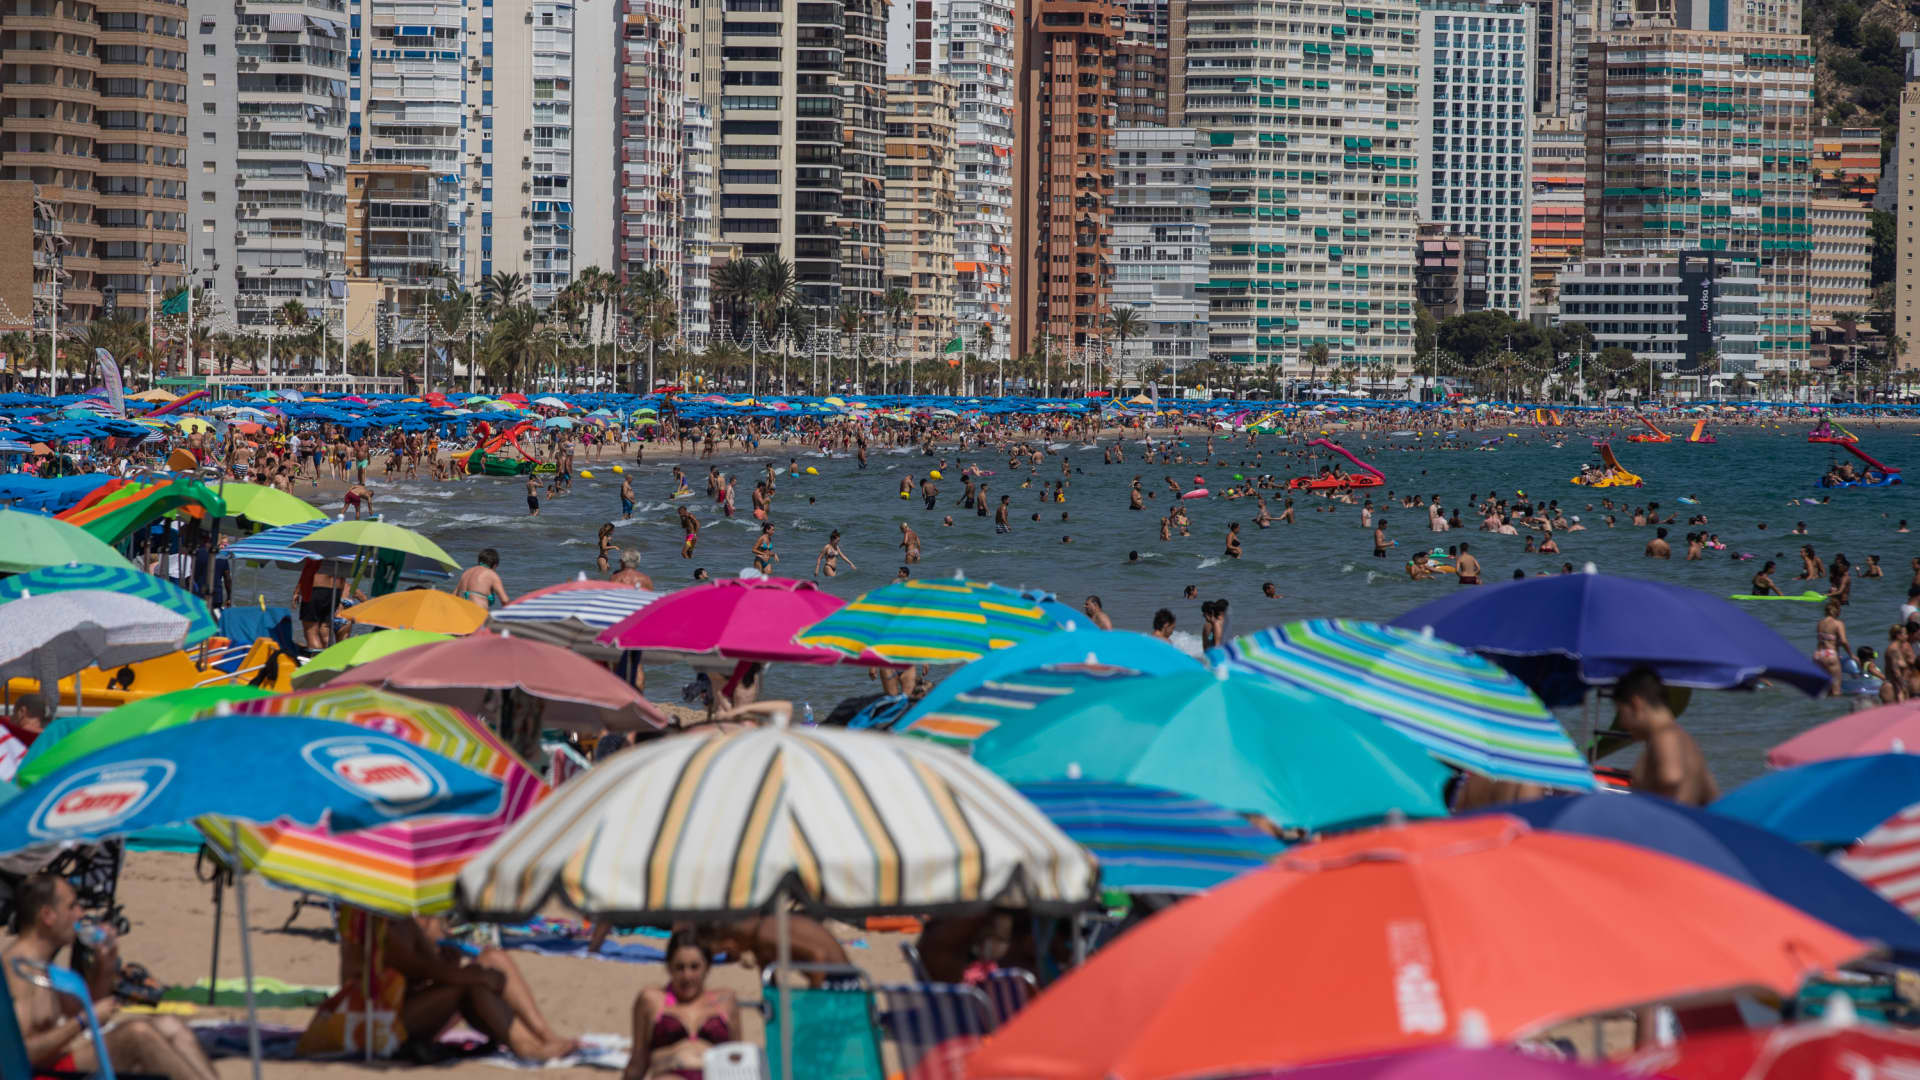 Tourists fill the Levante beach in Benidorm to quench high temperatures as a heatwave sweeps across Spain on July 16, 2022 in Benidorm, Spain. 